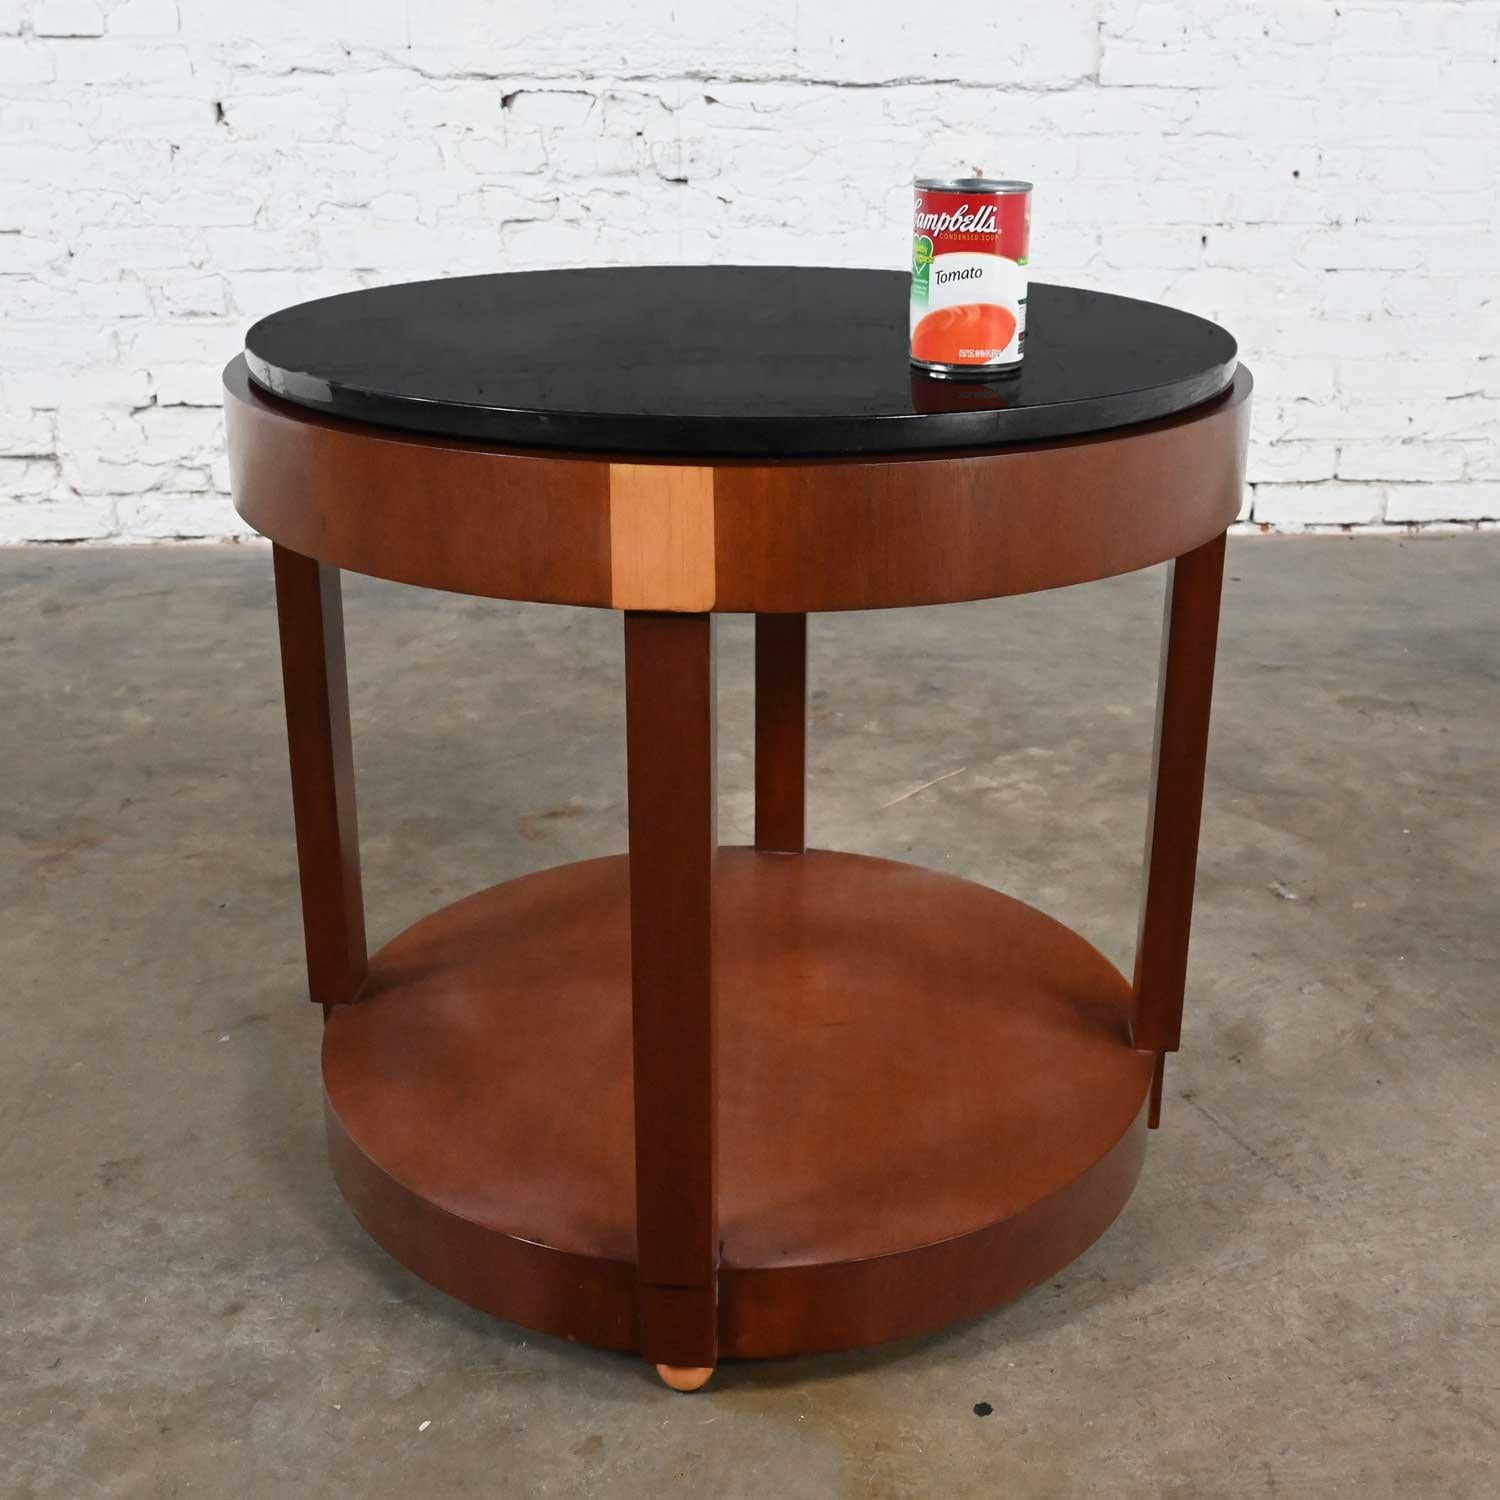 Art Deco Revival Custom Two Toned Mahogany Round Side Table Black Granite Top For Sale 9